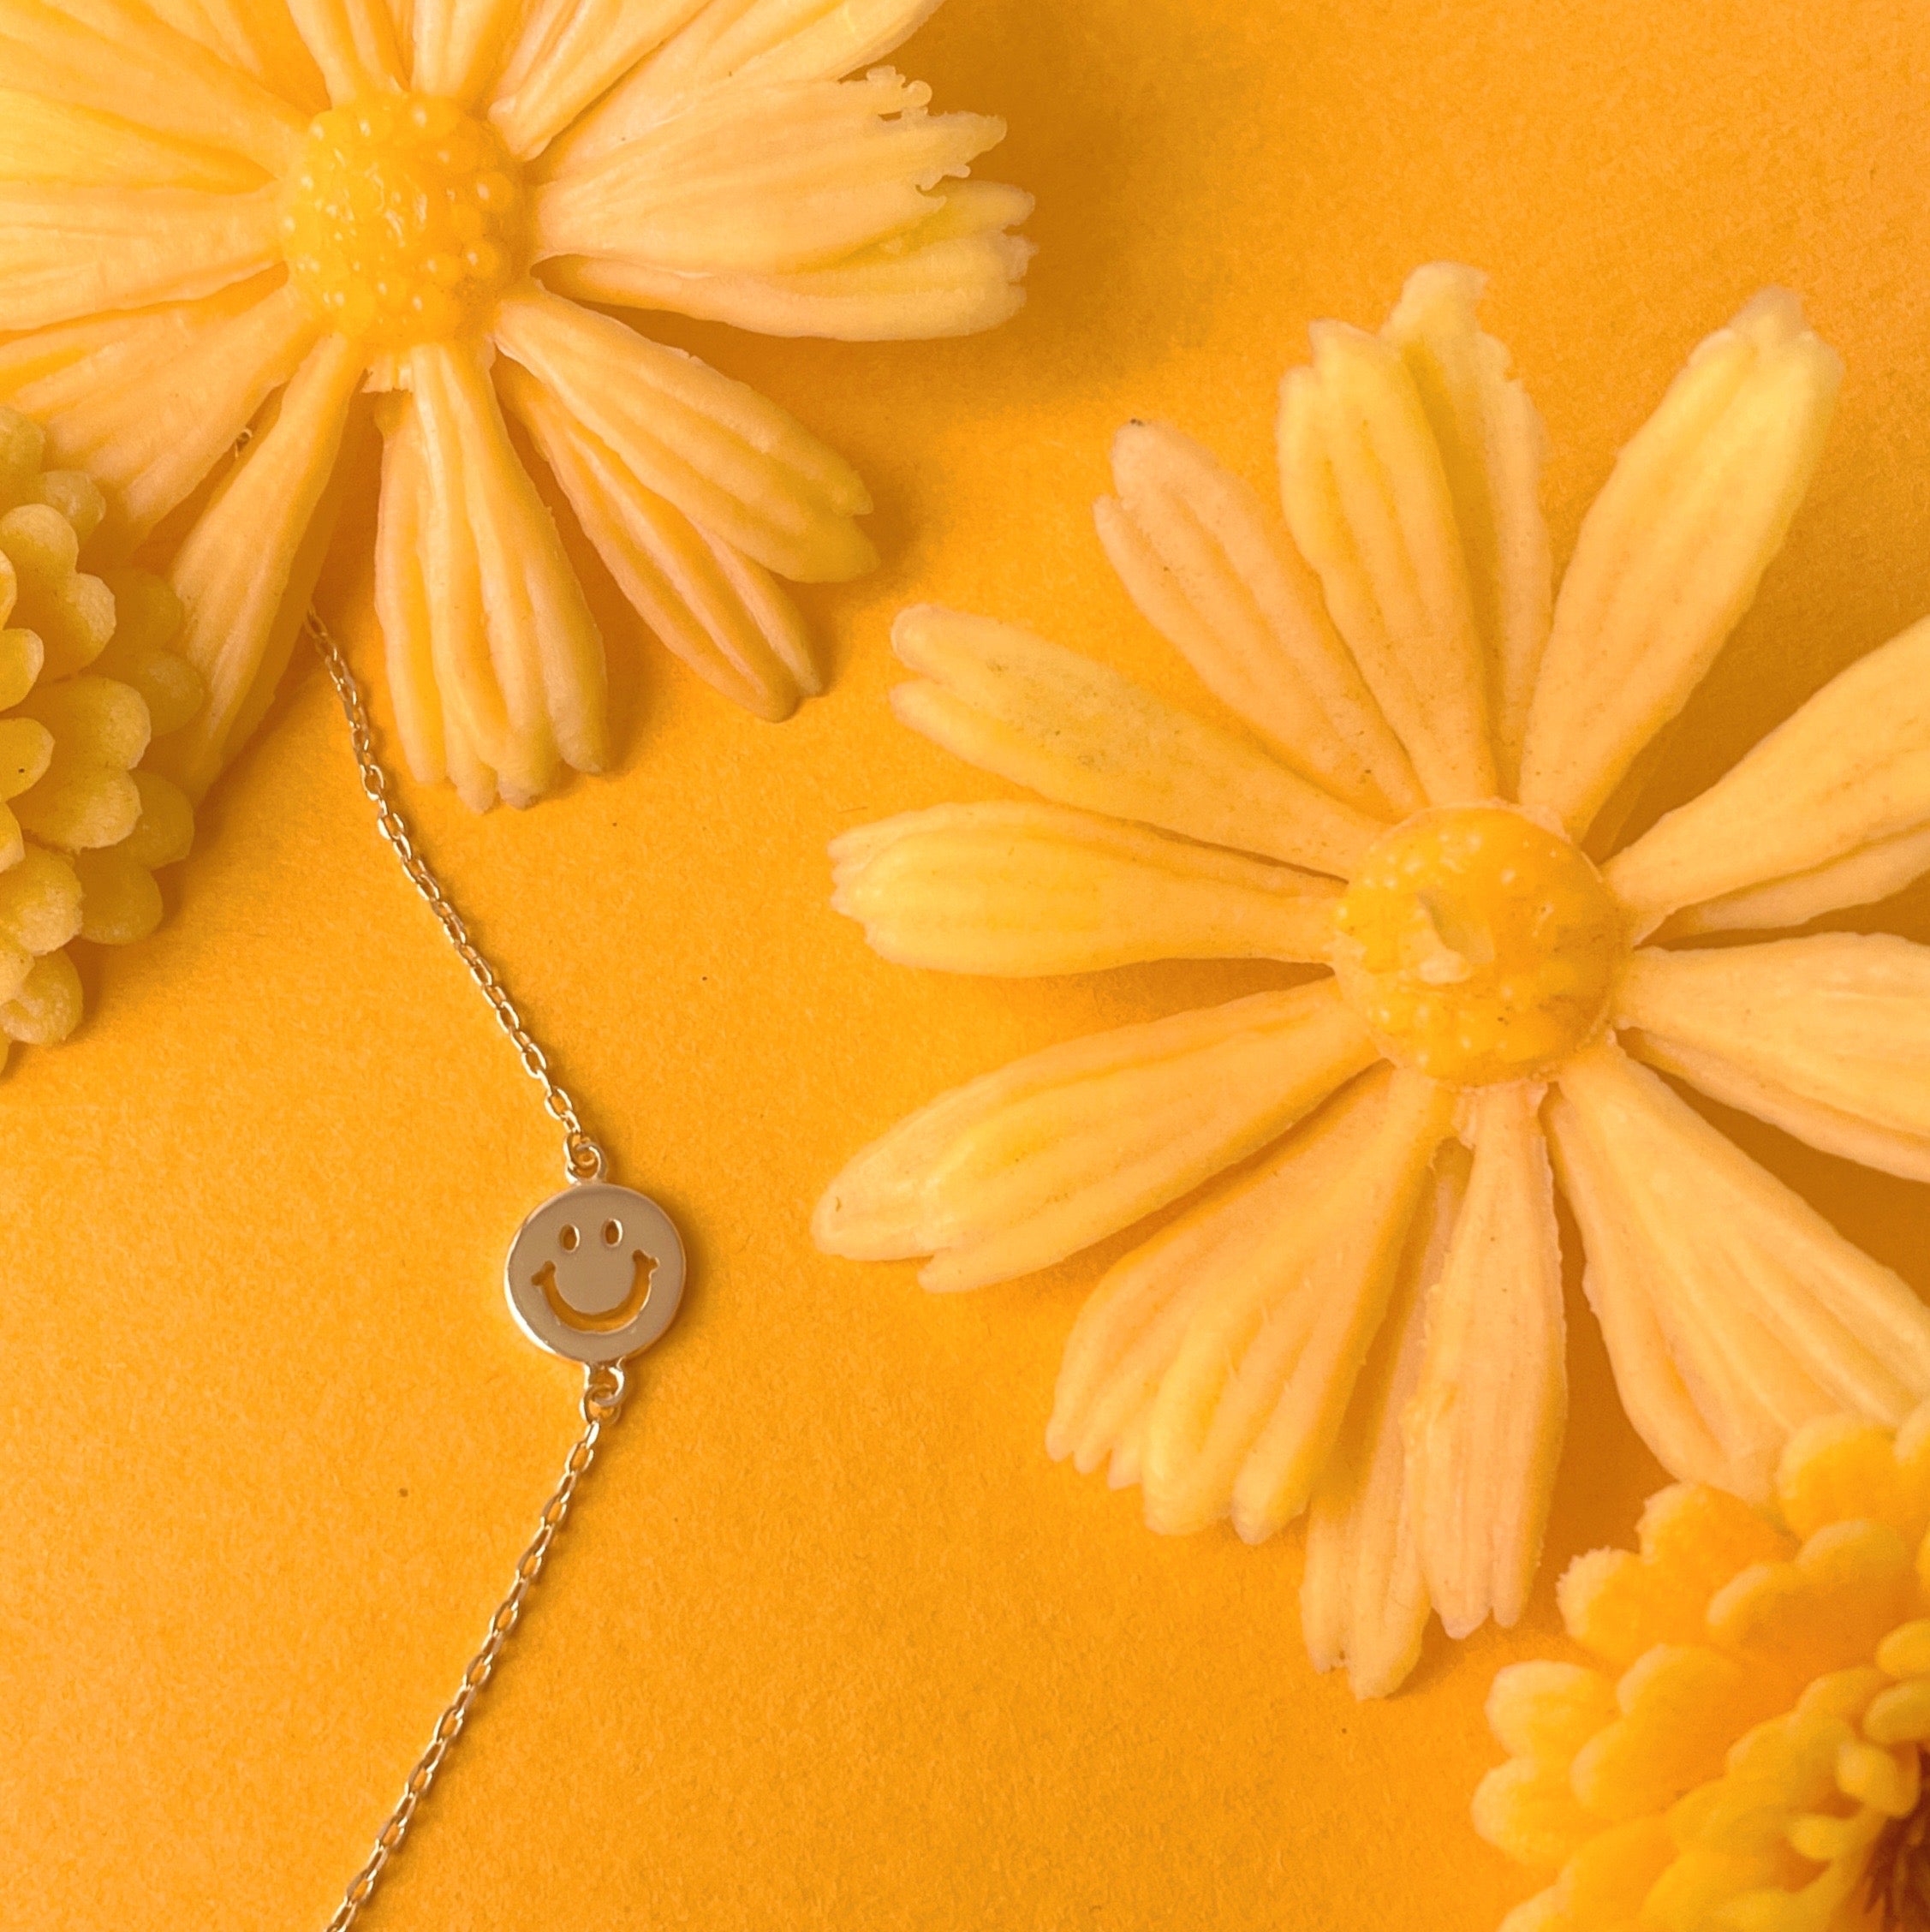 Gold chain necklace complete with classic smiley face pendant turned sideways. The pendant is connected to the chain by two loops on each side.  This image features the necklace resting on a marigold colored ground with fake yellow daisies surrounding it.